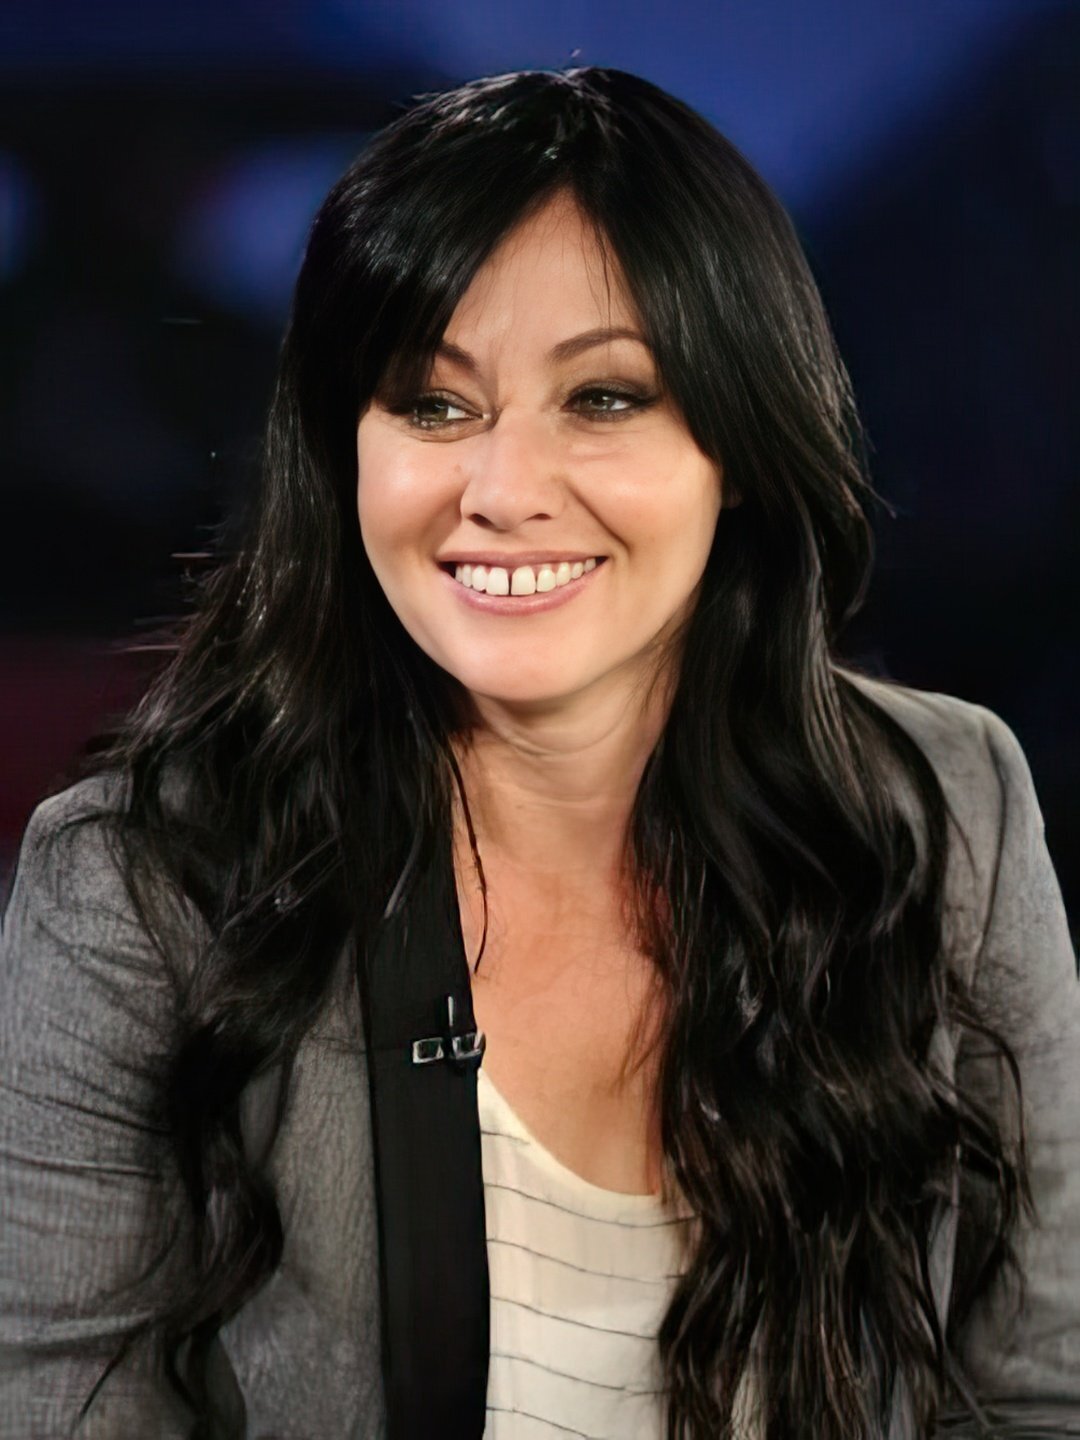 Shannen Doherty who is her mother